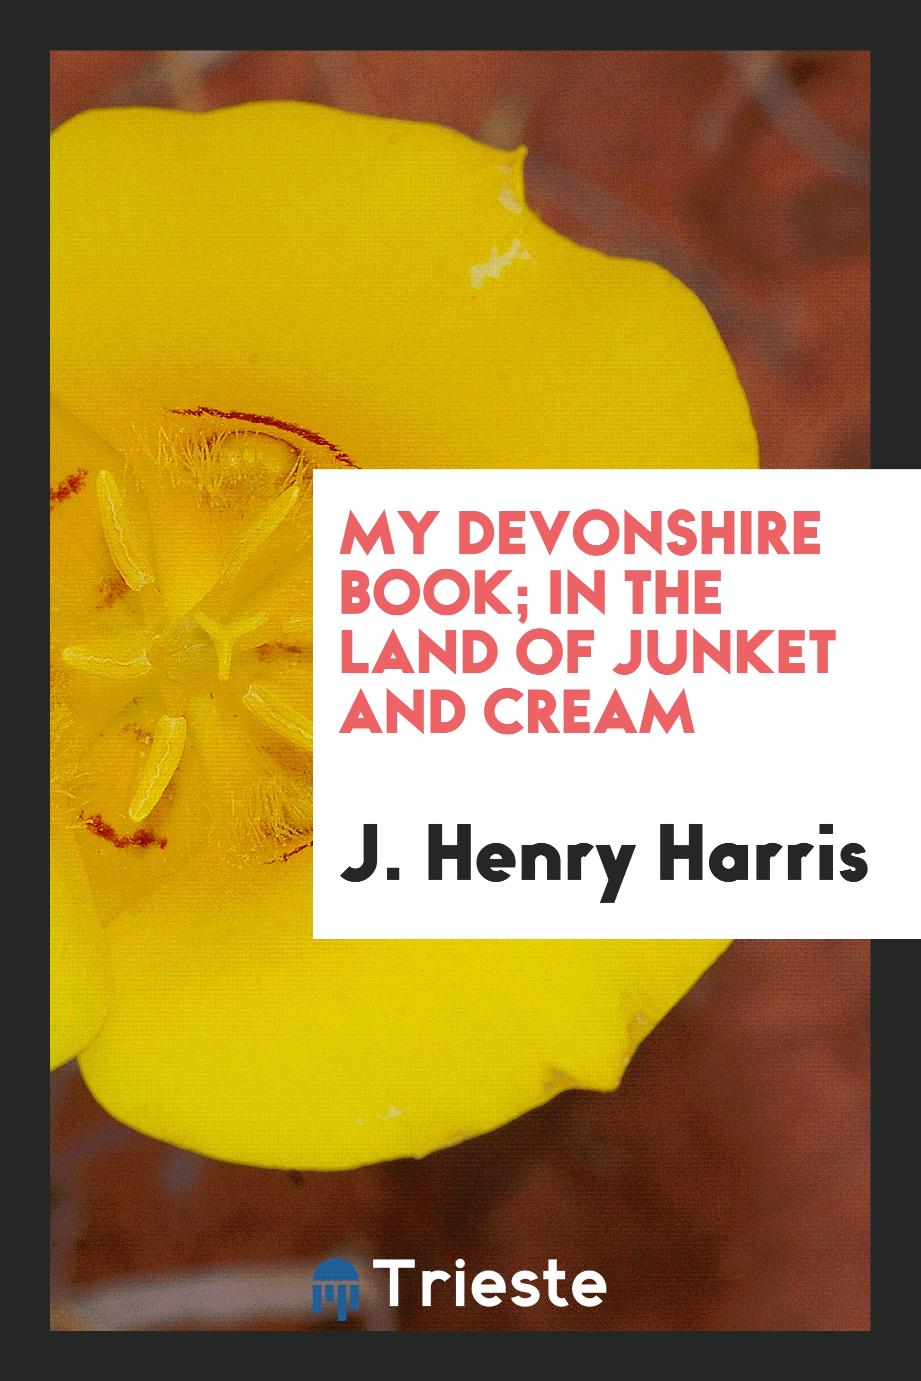 My Devonshire book; in the land of junket and cream